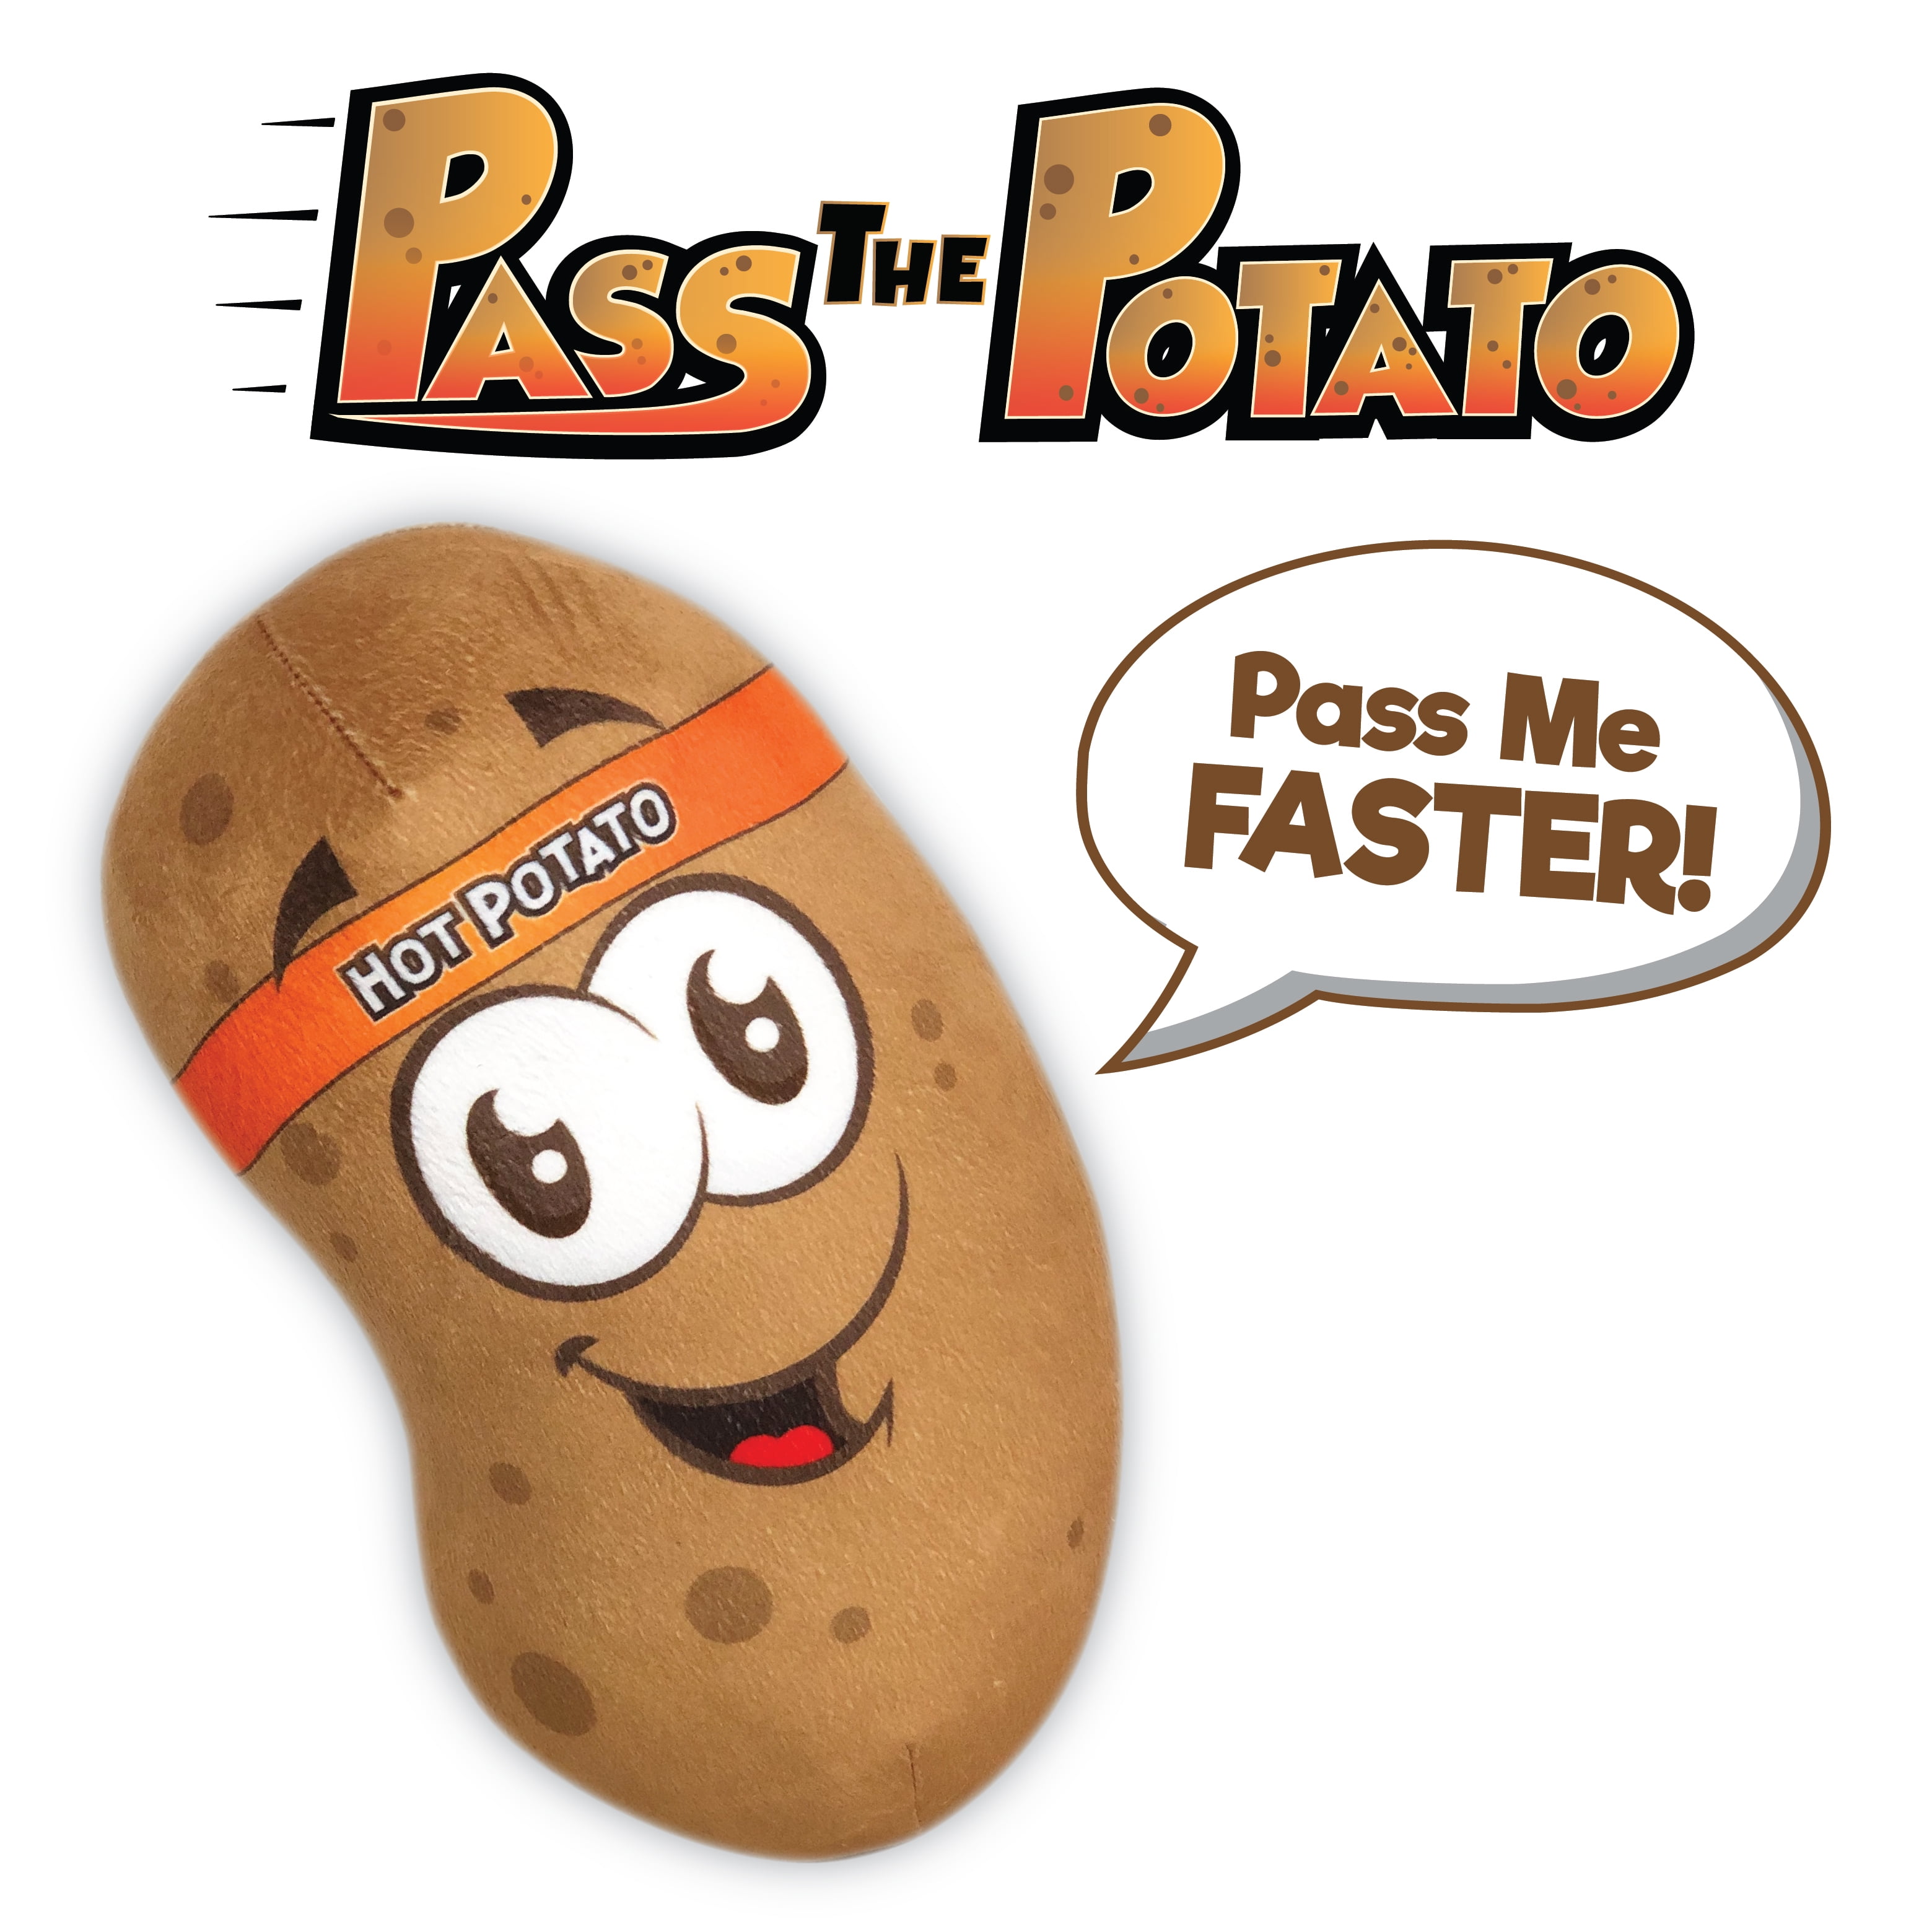 ideal hot potato electronic musical passing game